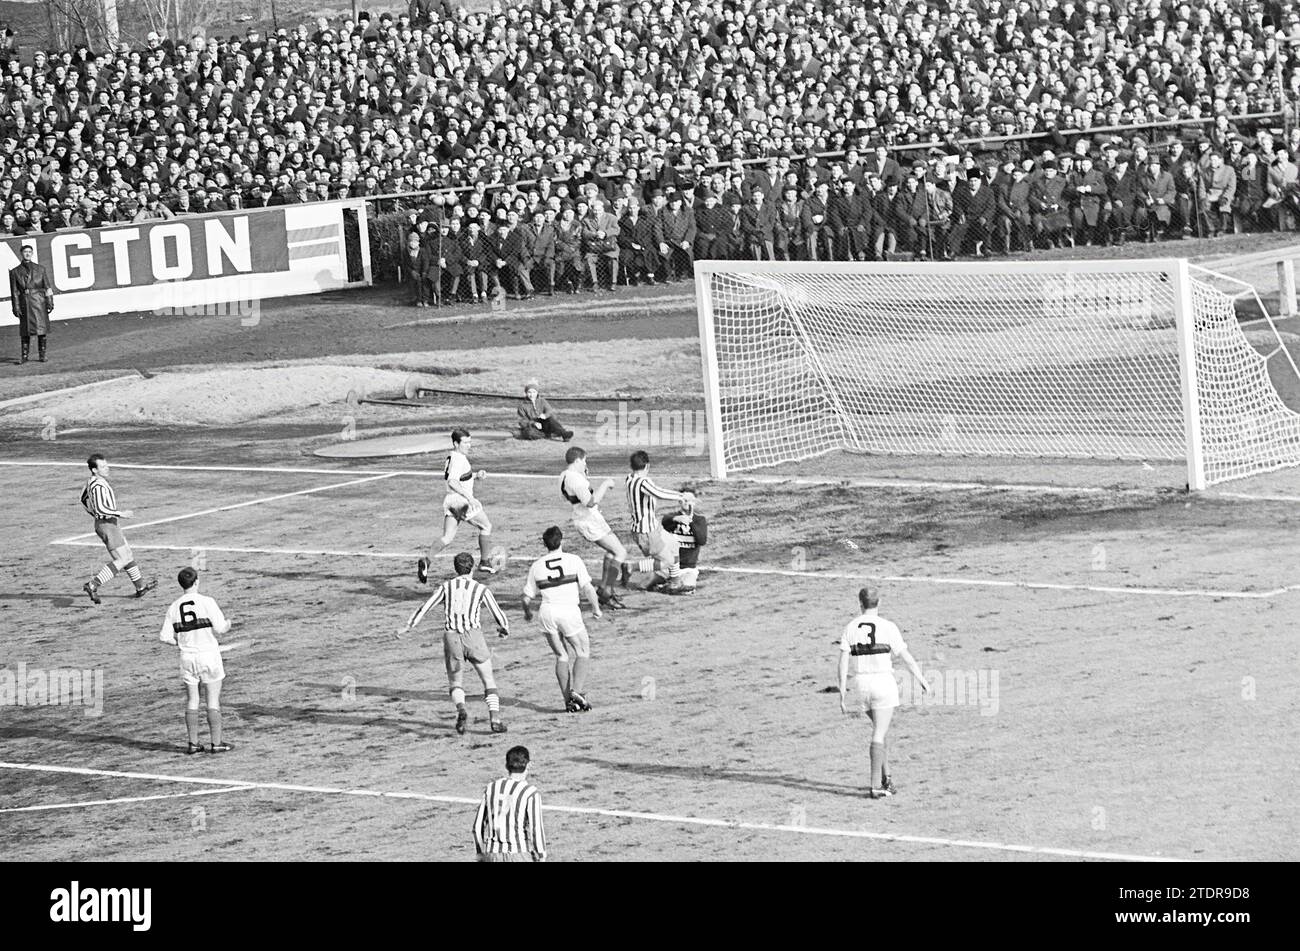 Vasas ETO Gy?r - D.W.S., Football, 10-03-1965, Whizgle News from the Past, Tailored for the Future. Explore historical narratives, Dutch The Netherlands agency image with a modern perspective, bridging the gap between yesterday's events and tomorrow's insights. A timeless journey shaping the stories that shape our future Stock Photo